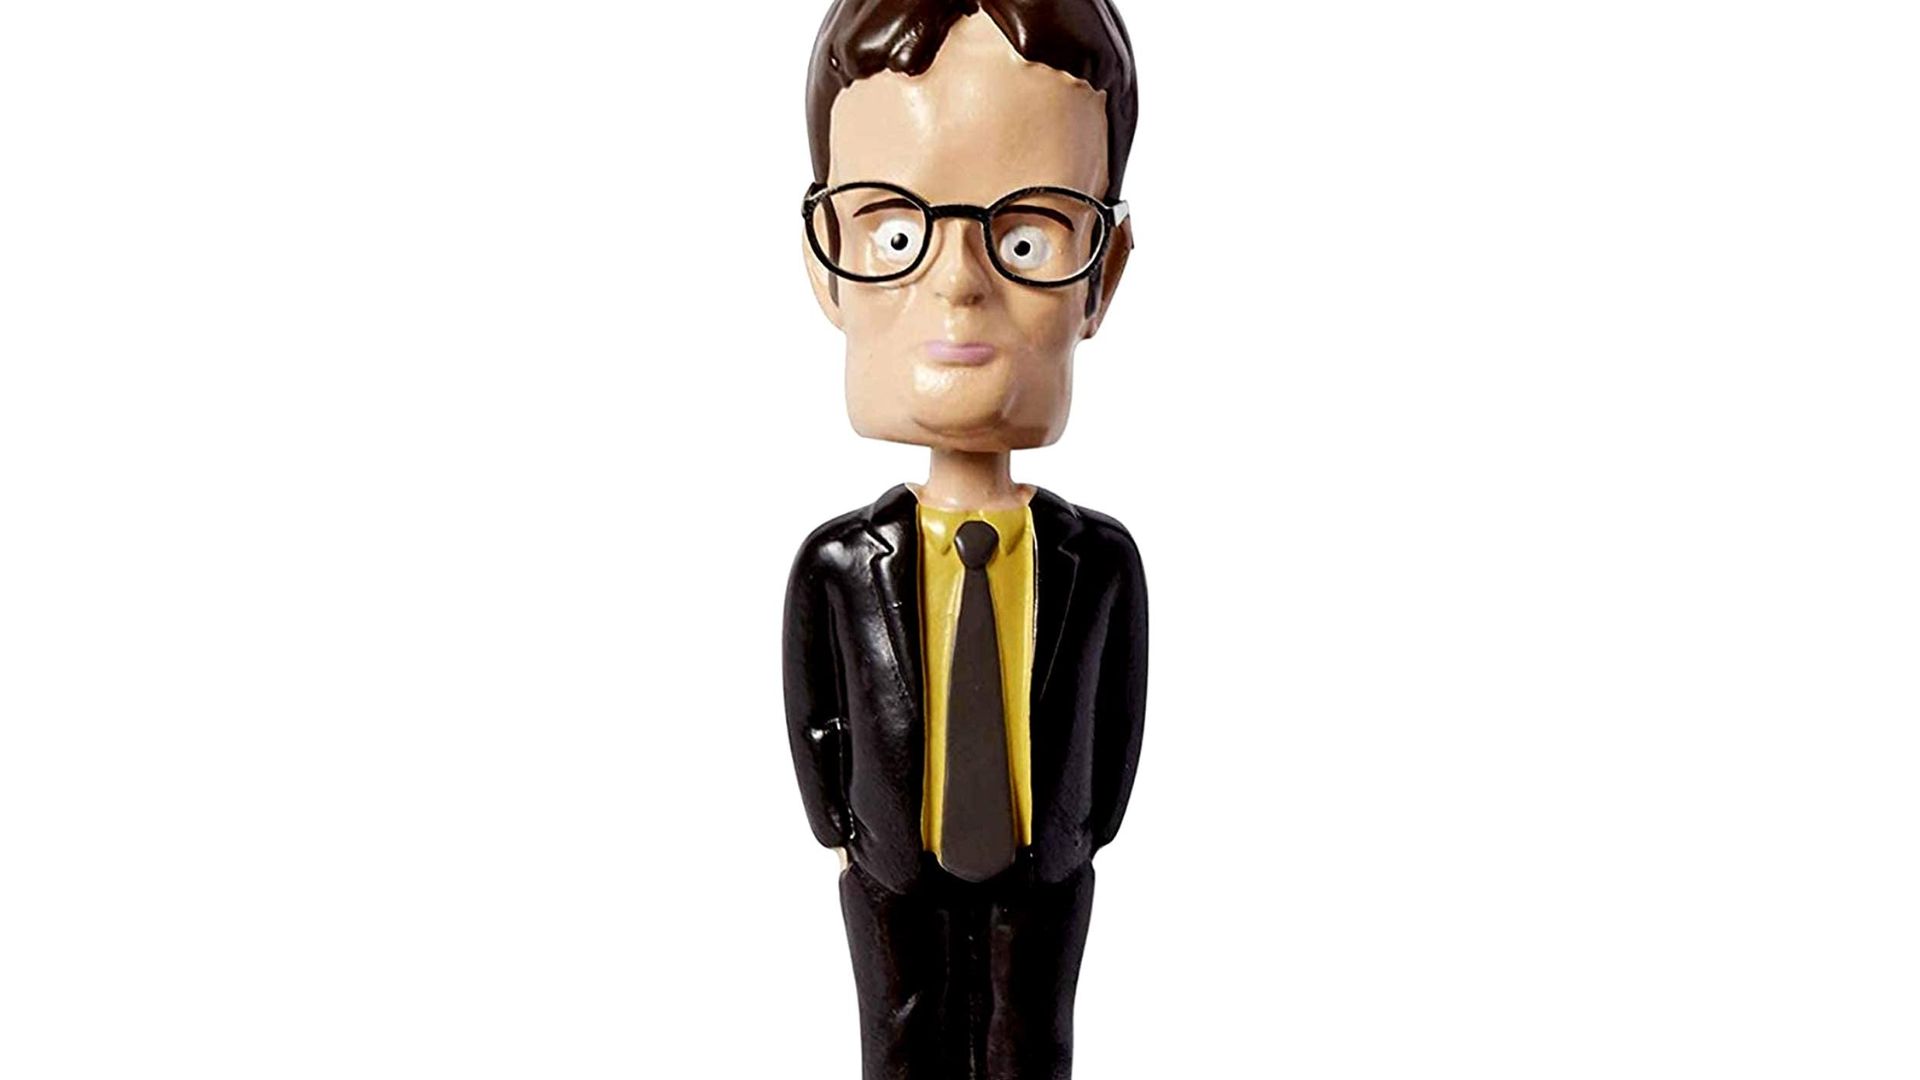 Bobble Head Of A Man Wearing A Yellow Shirt Under A Black Suit and Tie